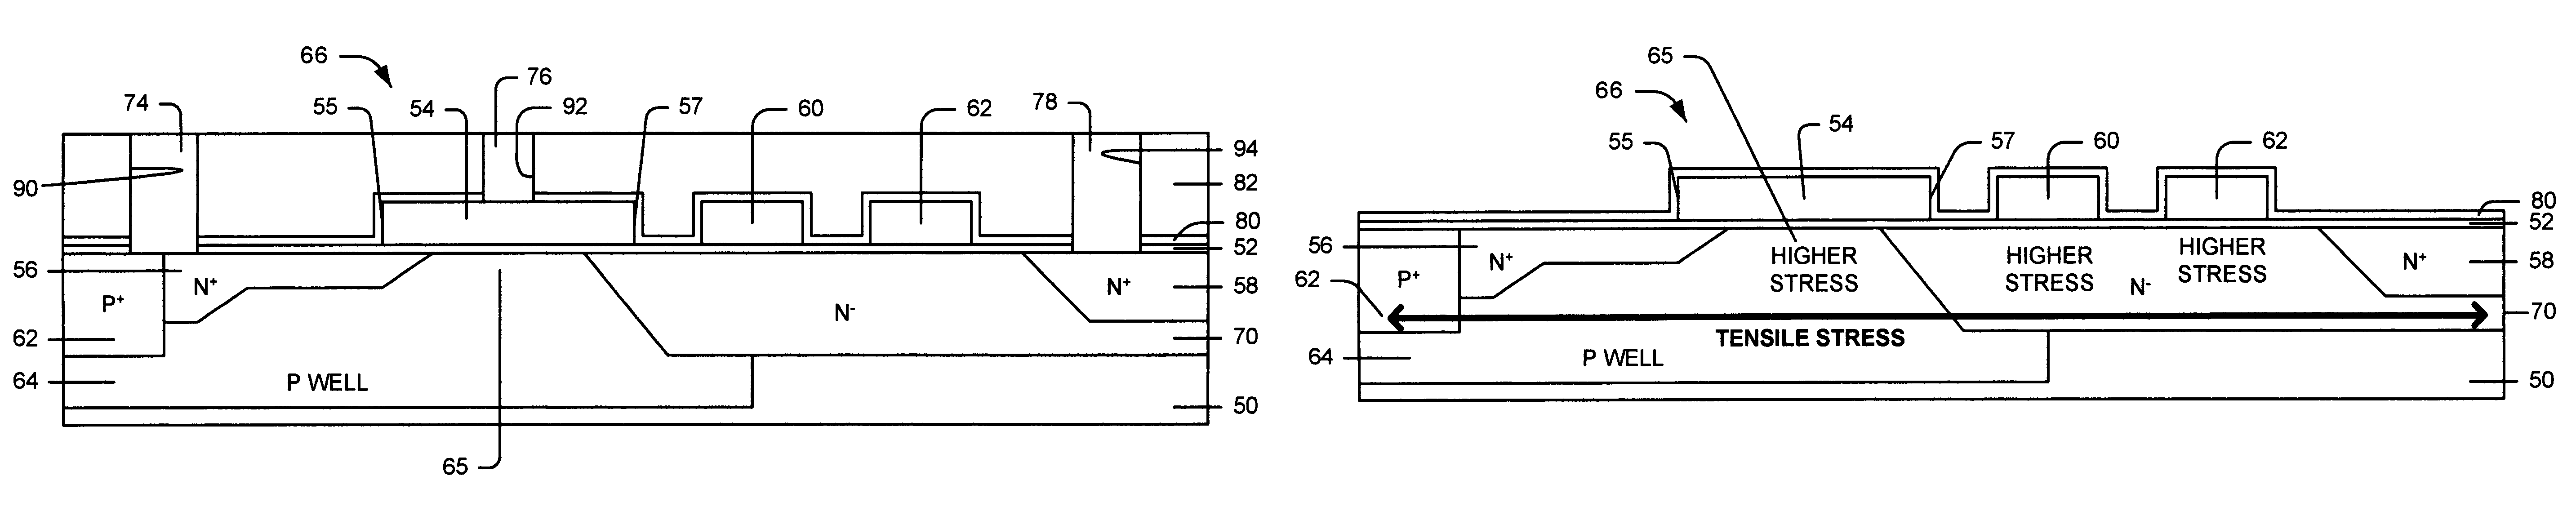 LDMOS using a combination of enhanced dielectric stress layer and dummy gates